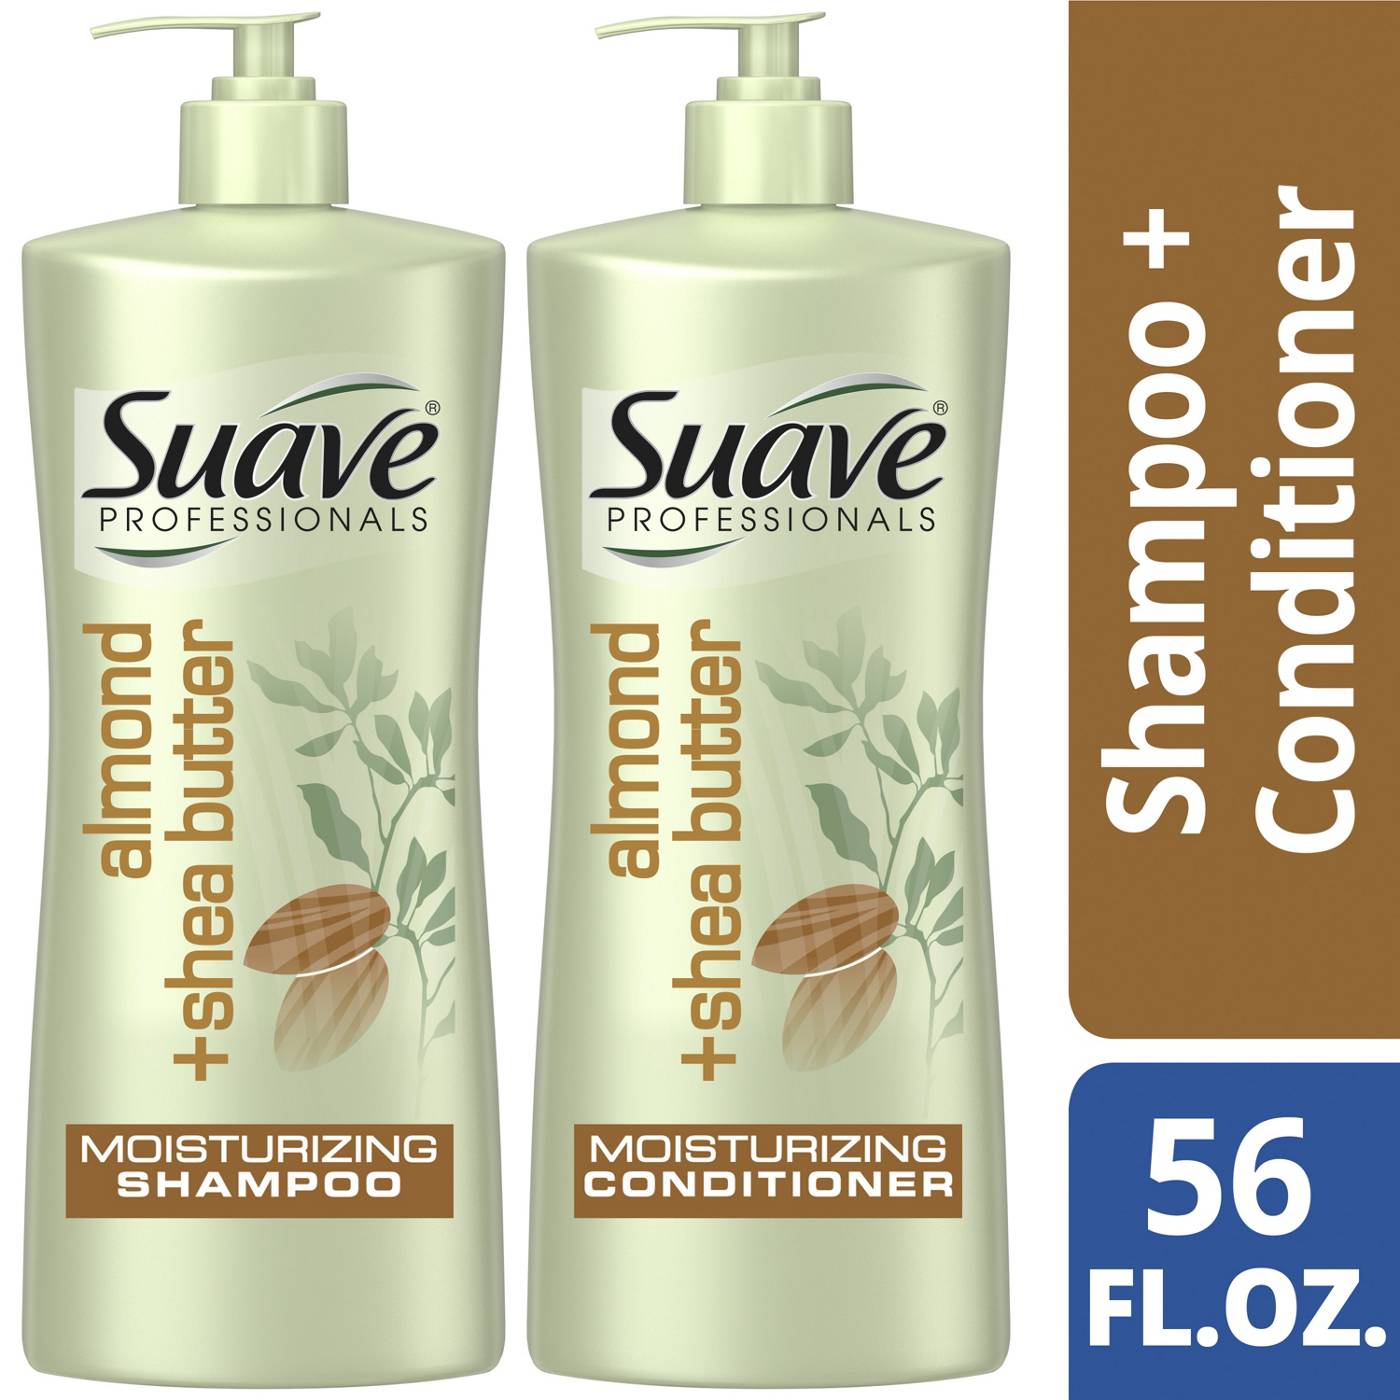 Suave Professionals Almond + Shea Butter Shampoo & Conditioner Combo Pack; image 5 of 7